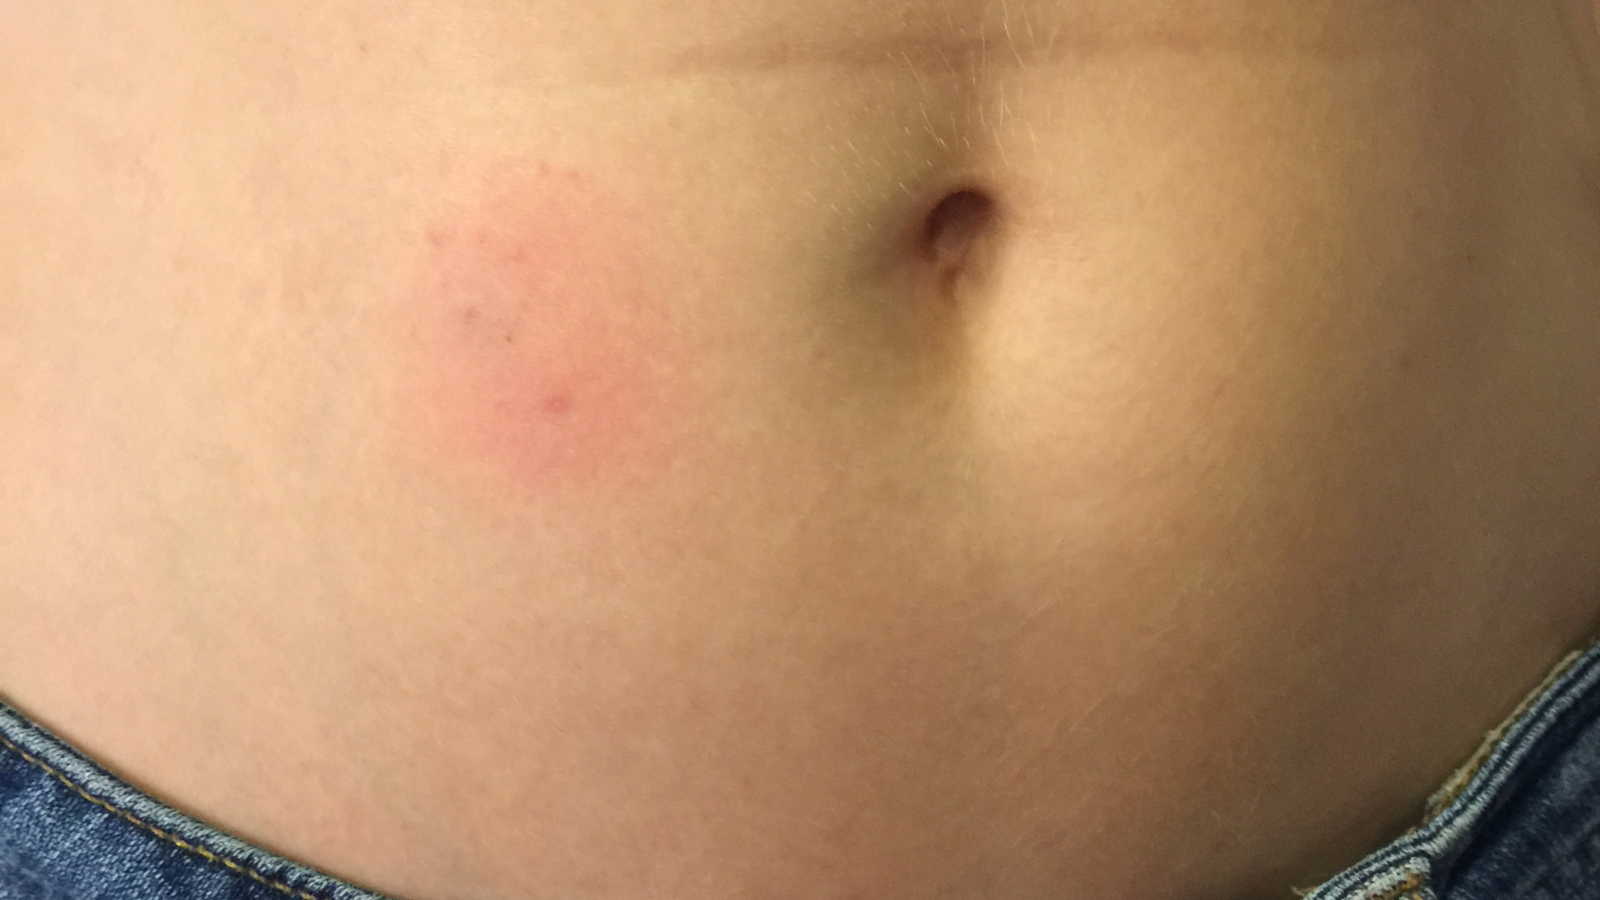 Close up of woman's stomach with red patch from IVF treatment